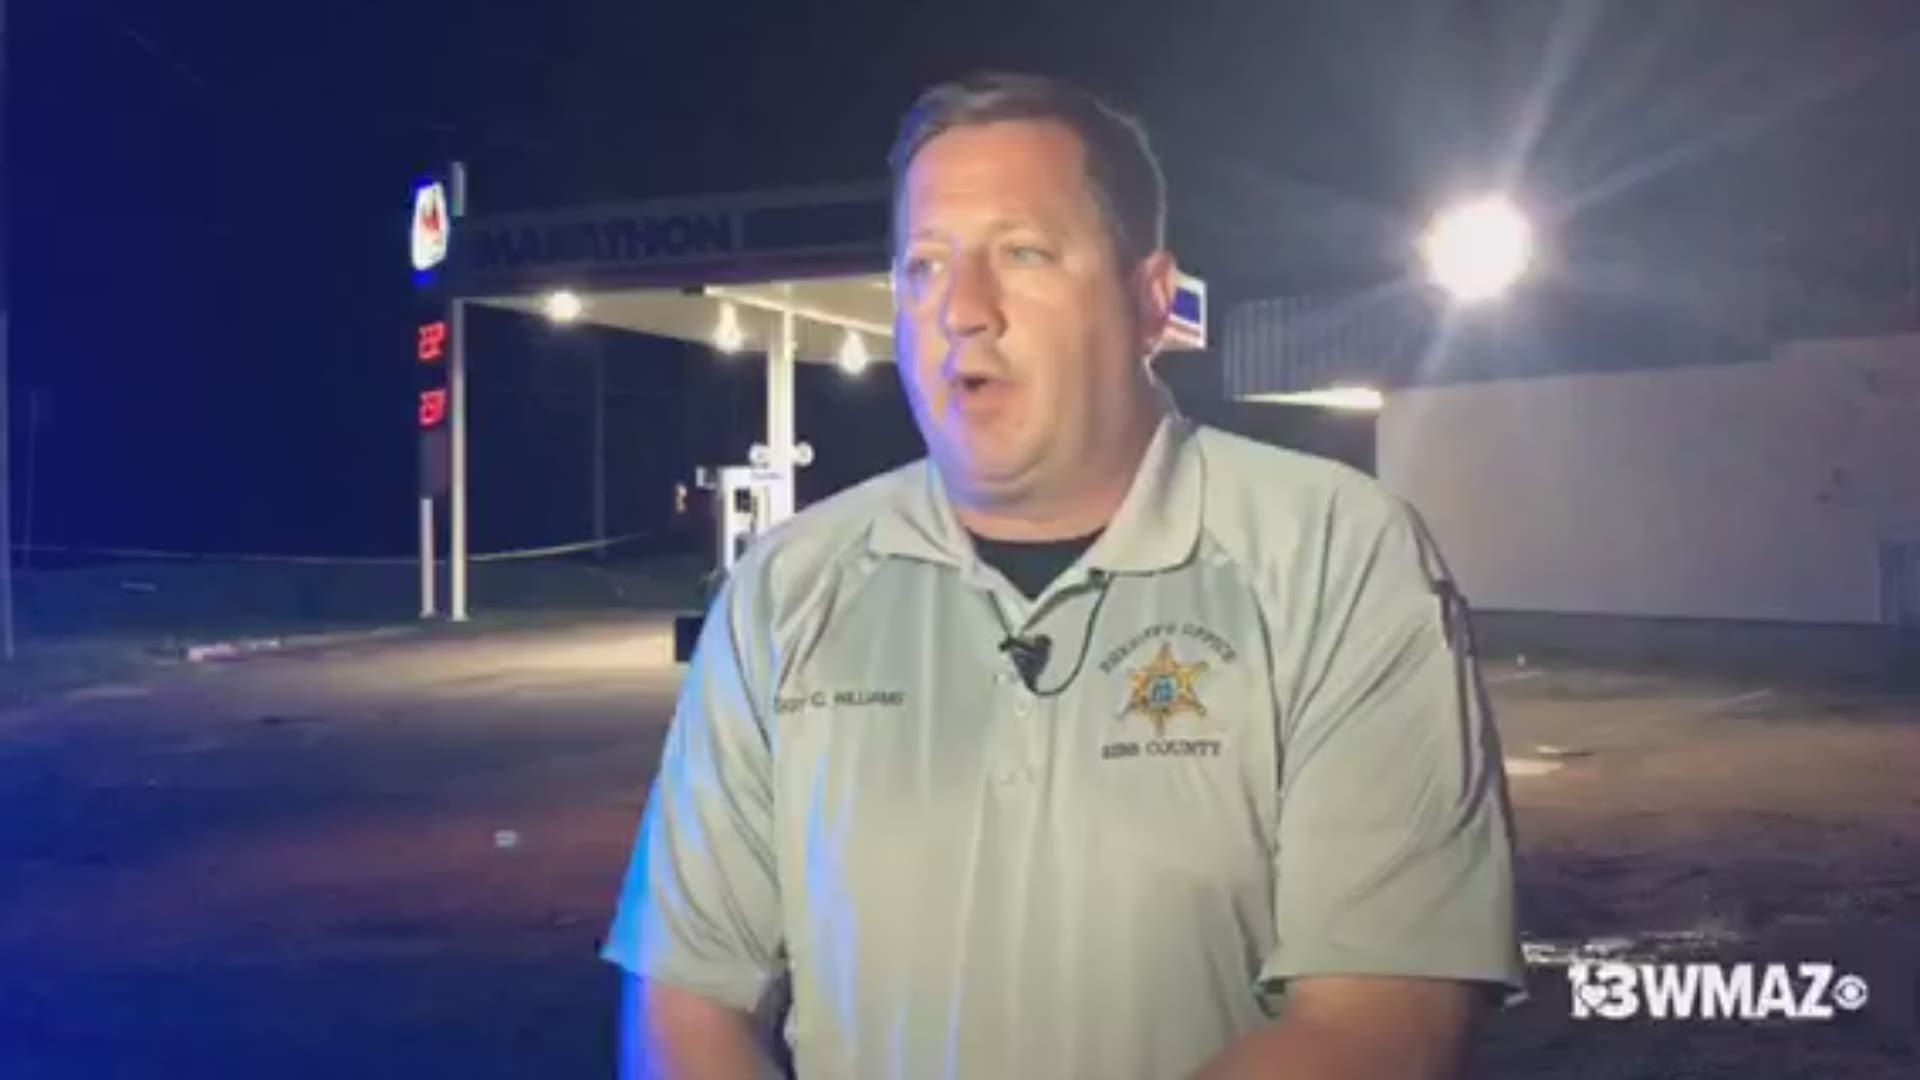 Sgt. Clay Williams with the Bibb County Sheriff's Office says one person was shot at the Marathon Gas Station at the corner of Irwinton Road and Jeffersonville Road.